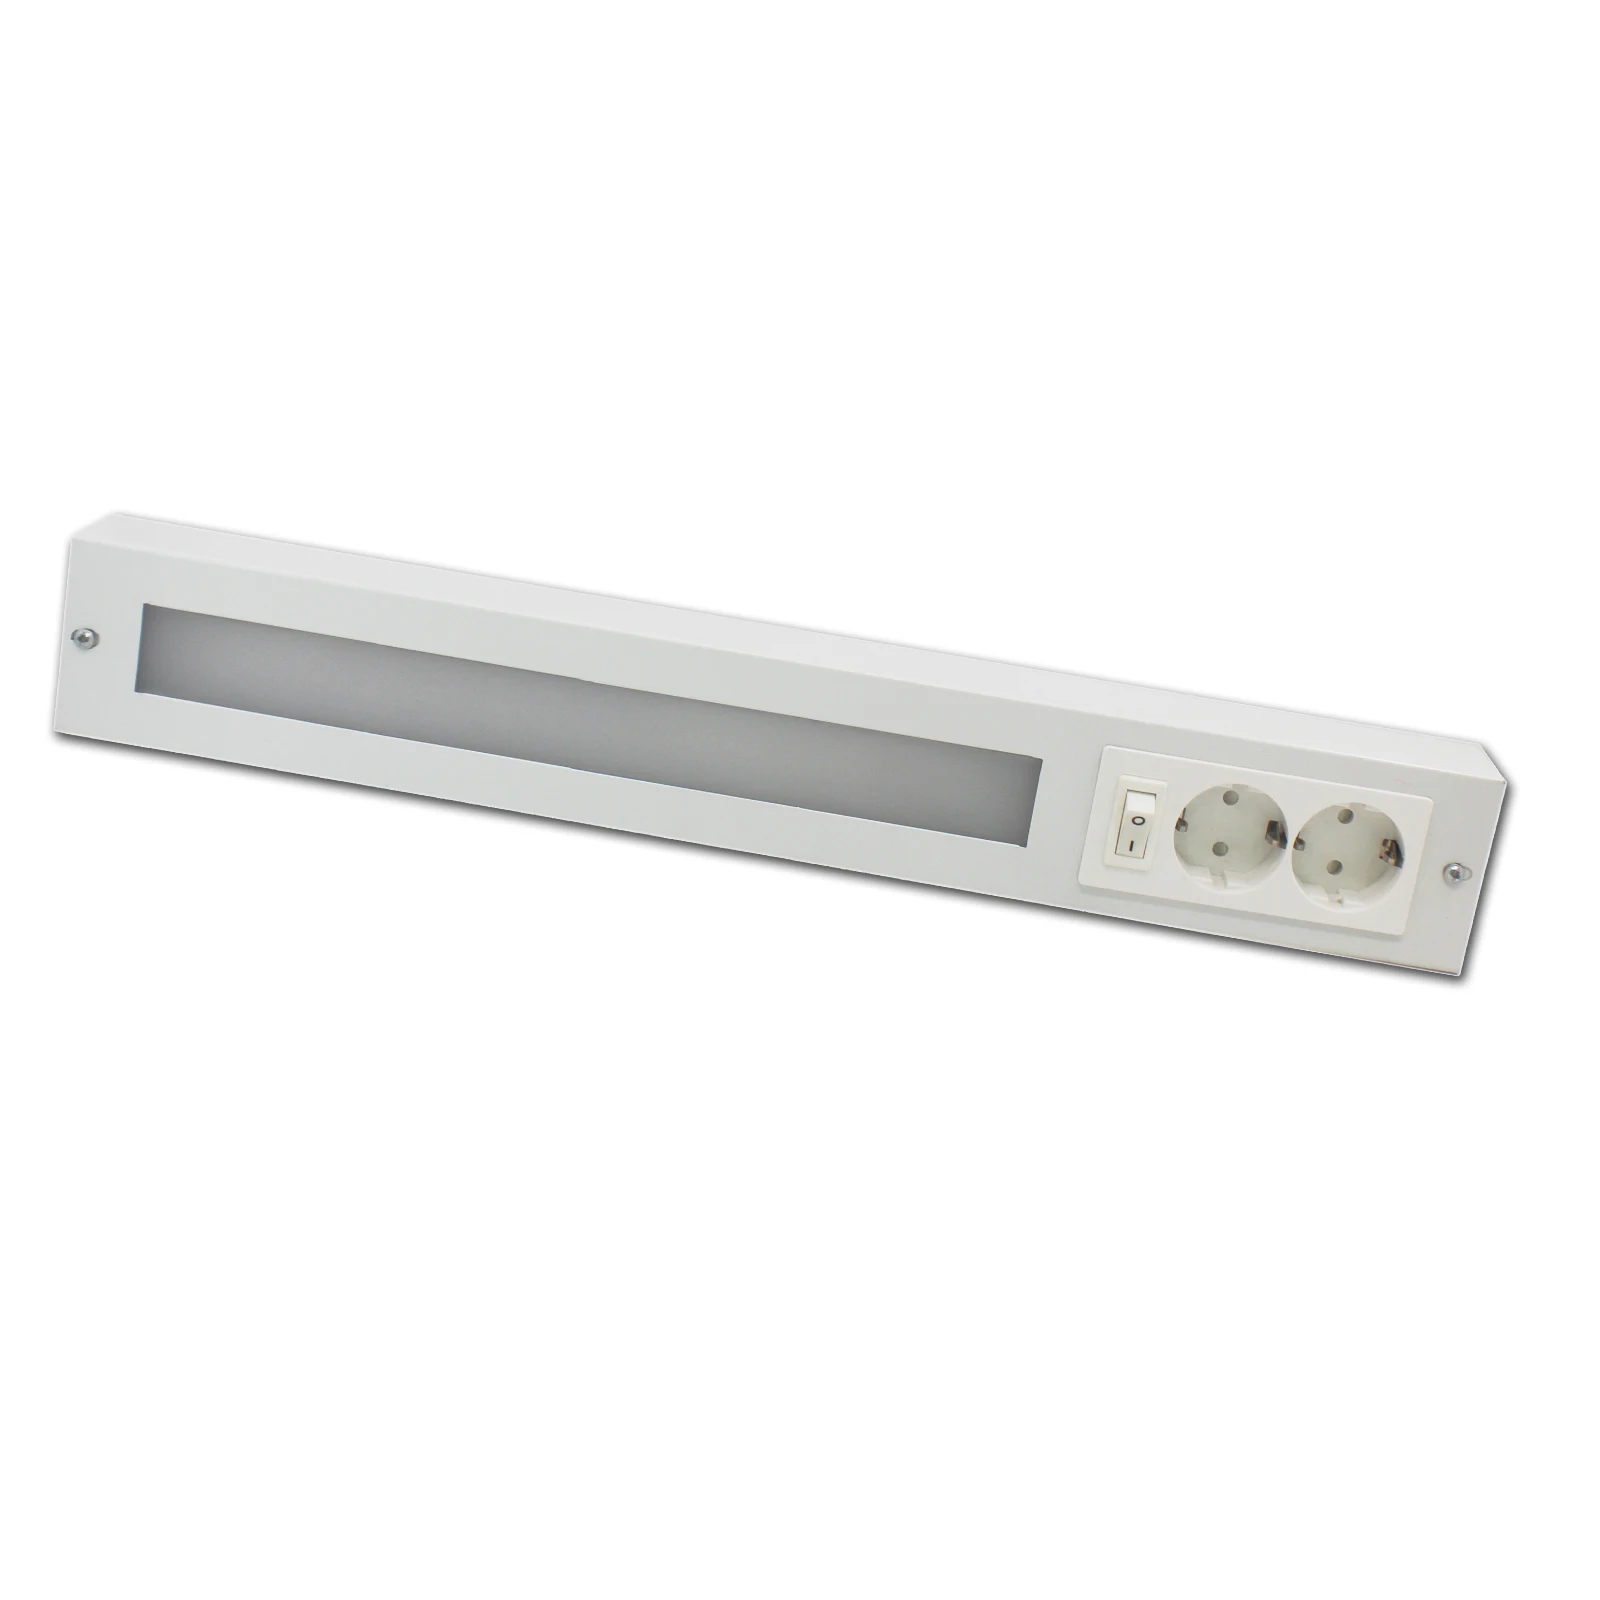 residential lighting led Under Cabinet Light 12W RA80 with socket switch